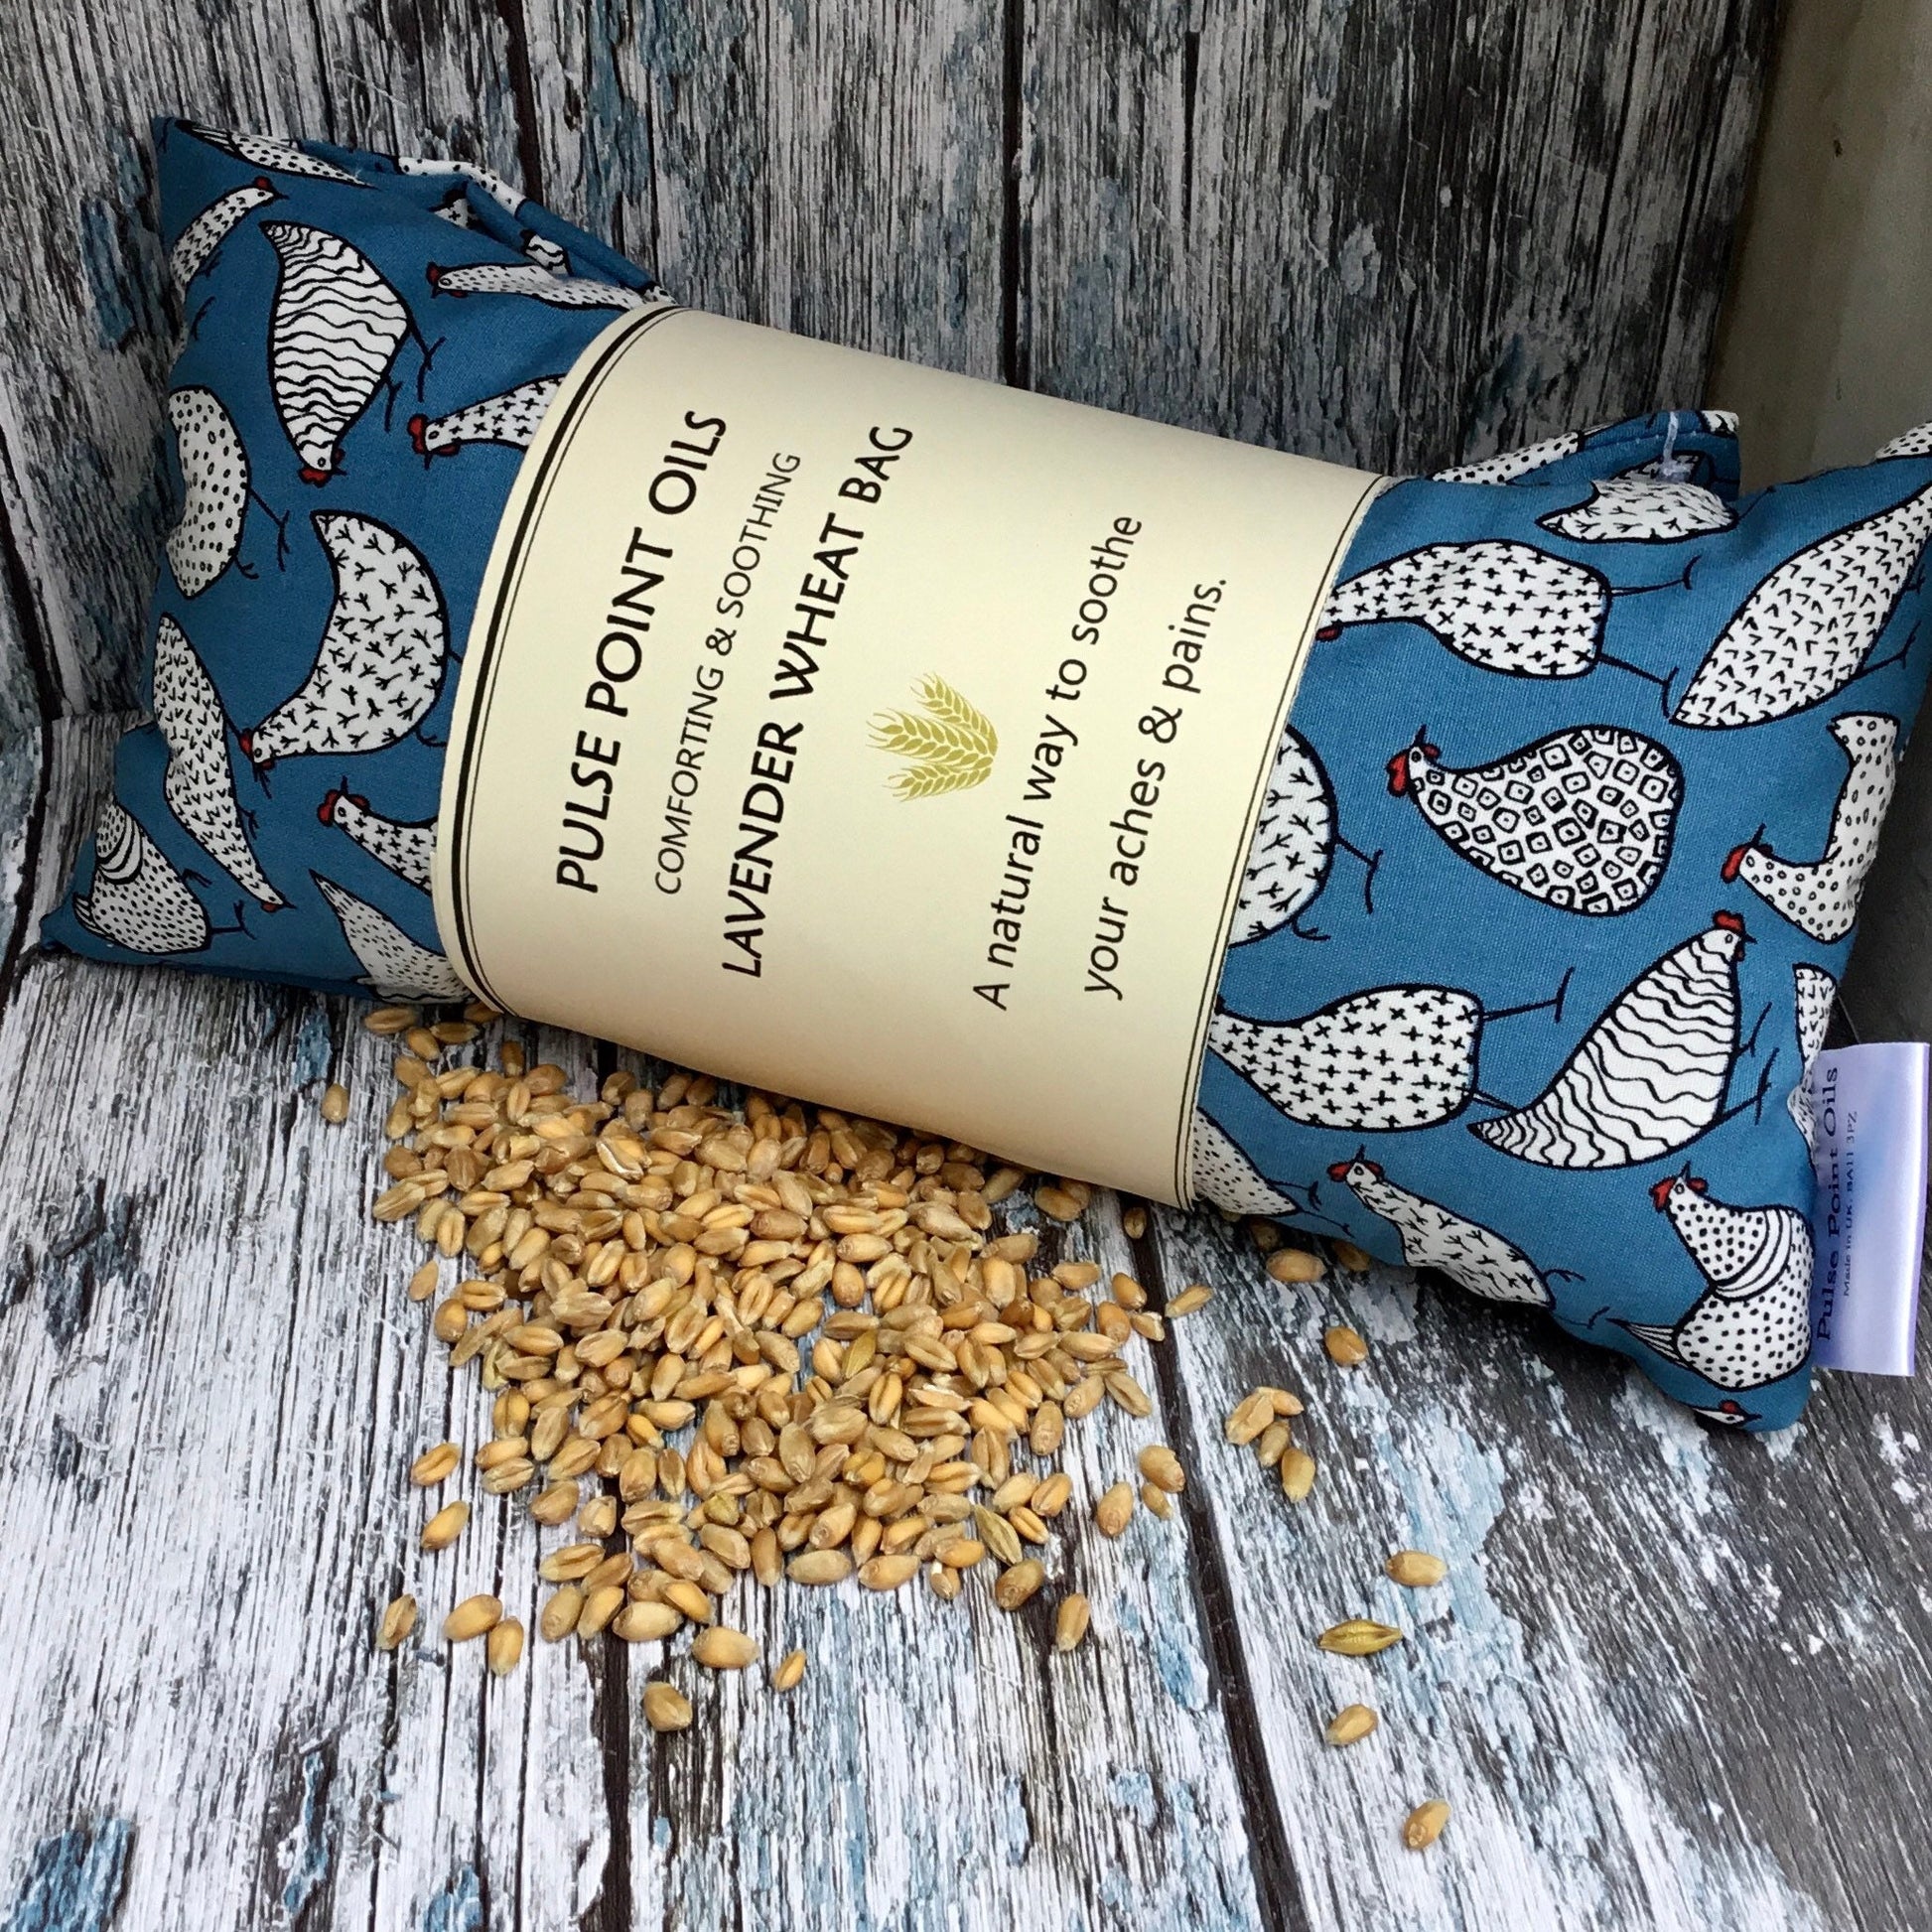 Lavender scented heat pad. Wheat bags a practical, eco friendly wellbeing gift, blue french hen get well gift.